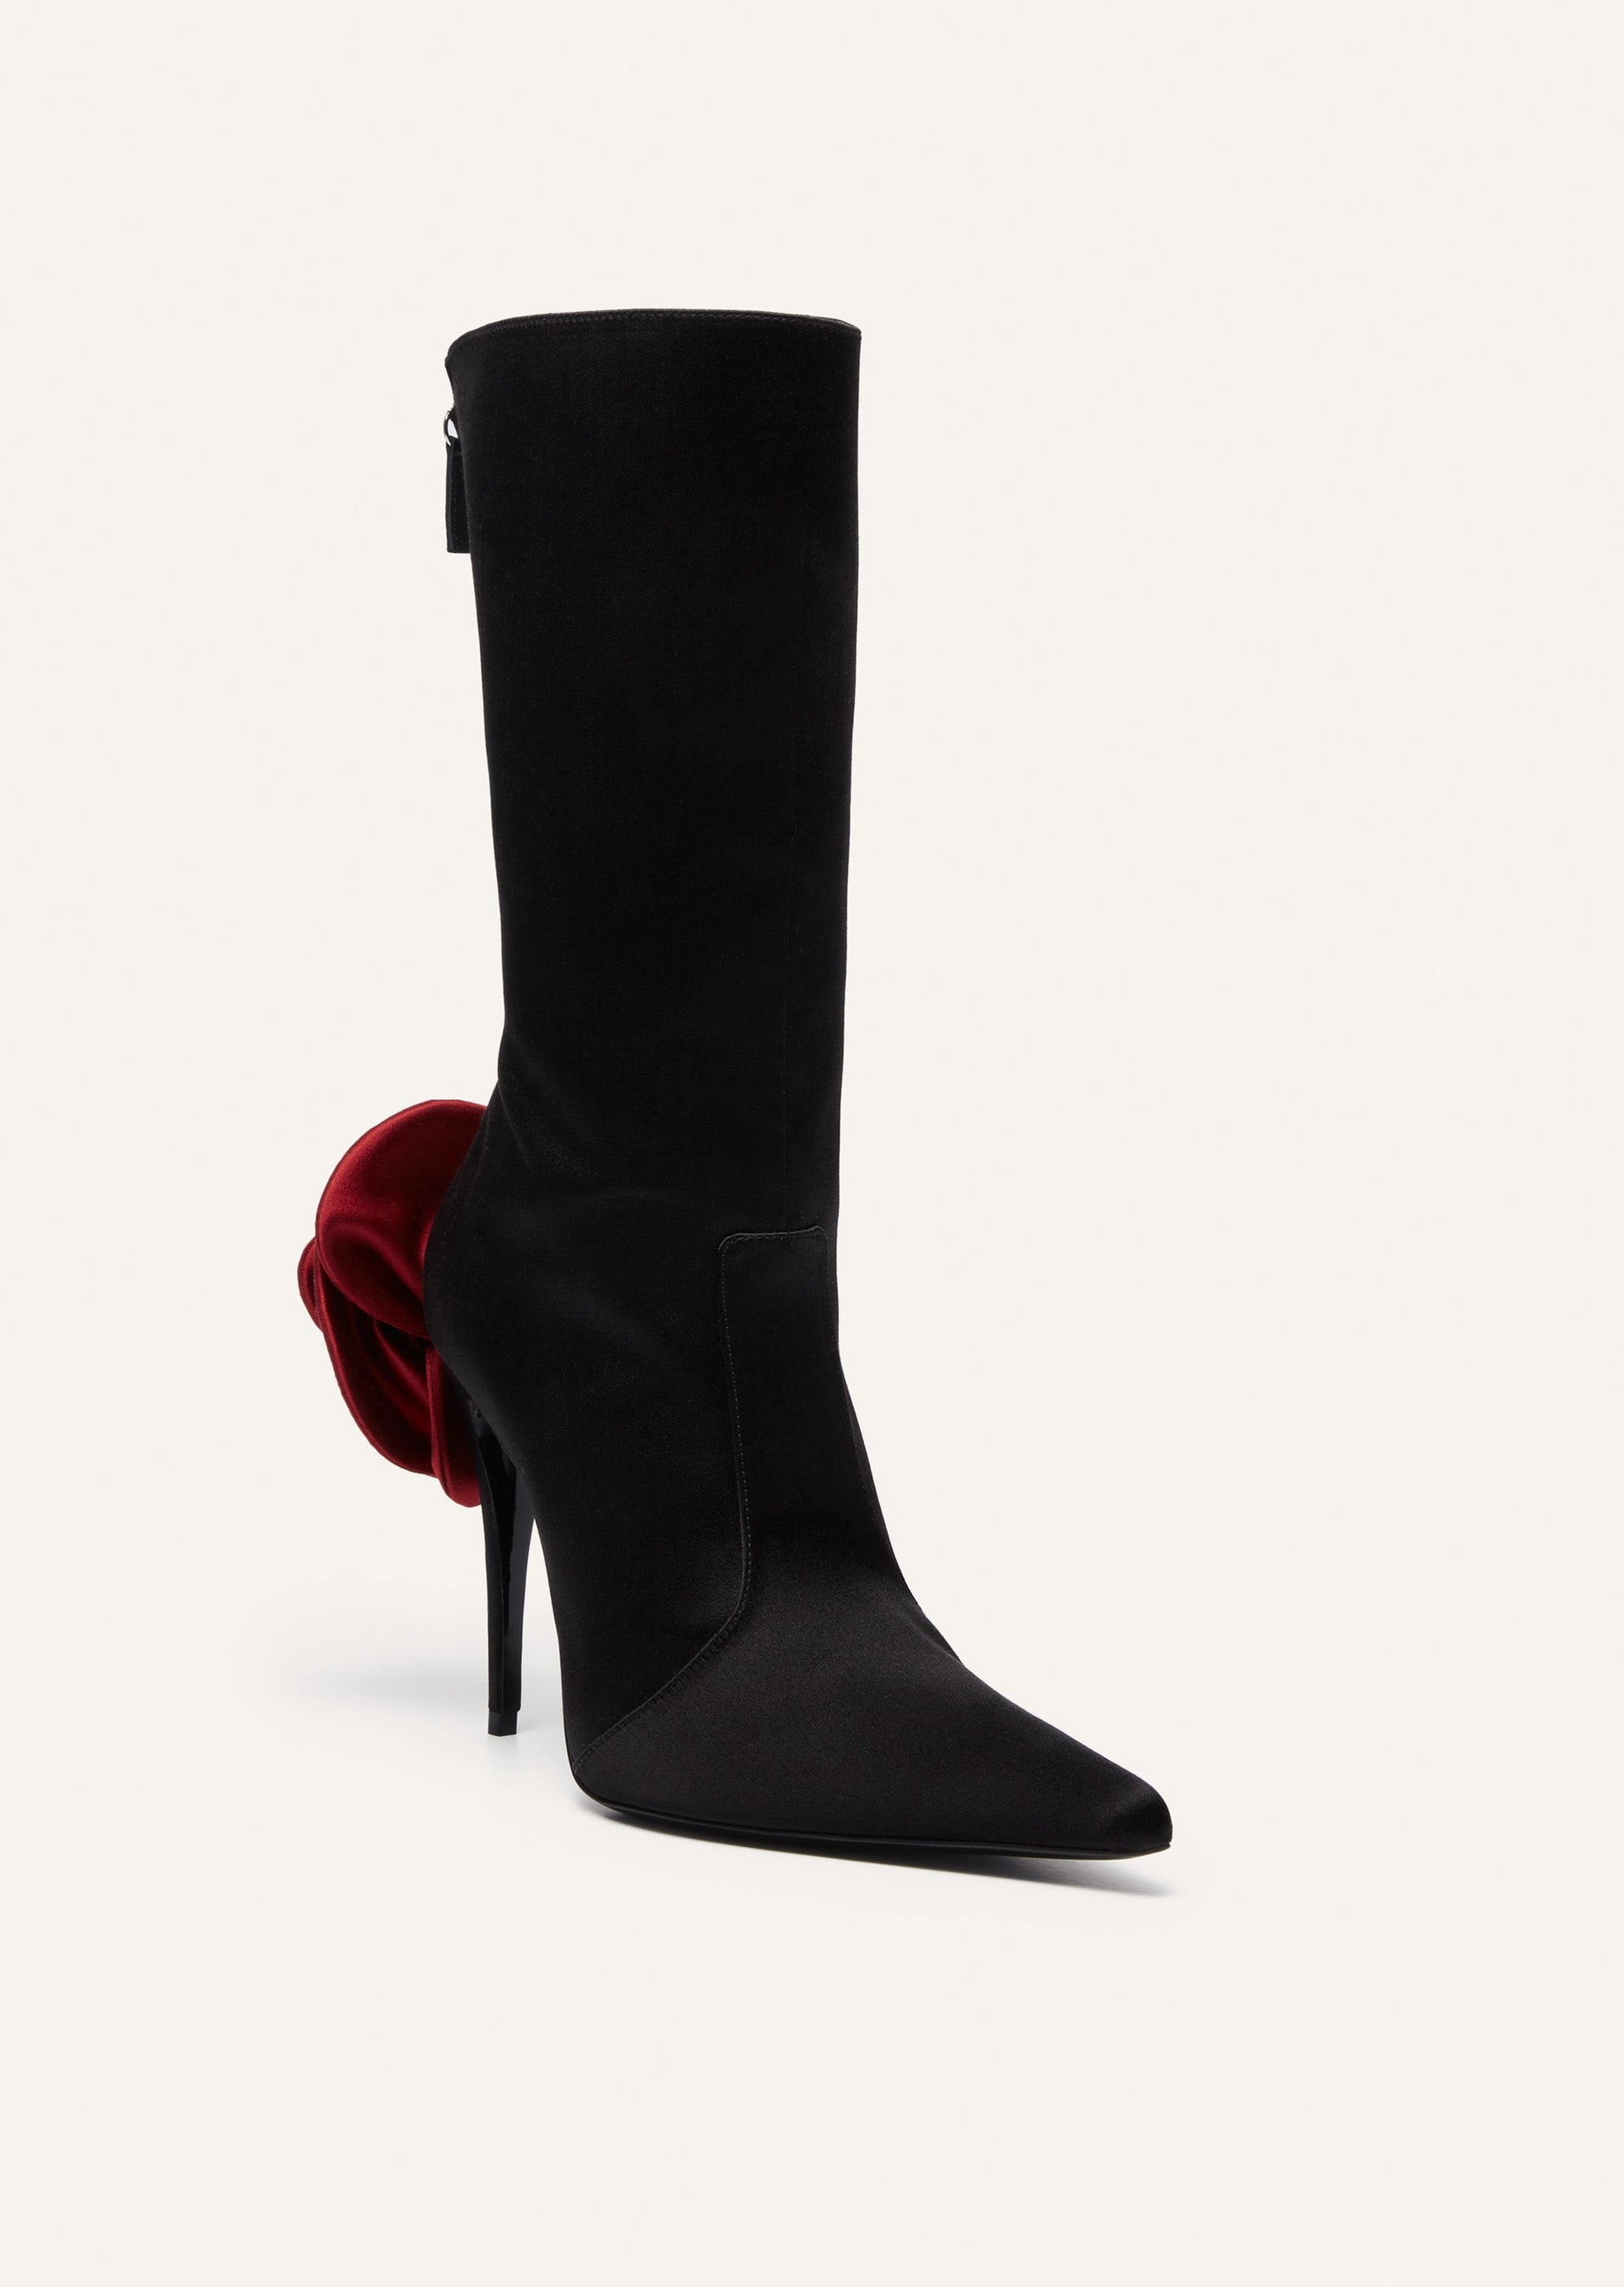 RE24 SHARP POINTED FLOWER BOOTS SATIN RED